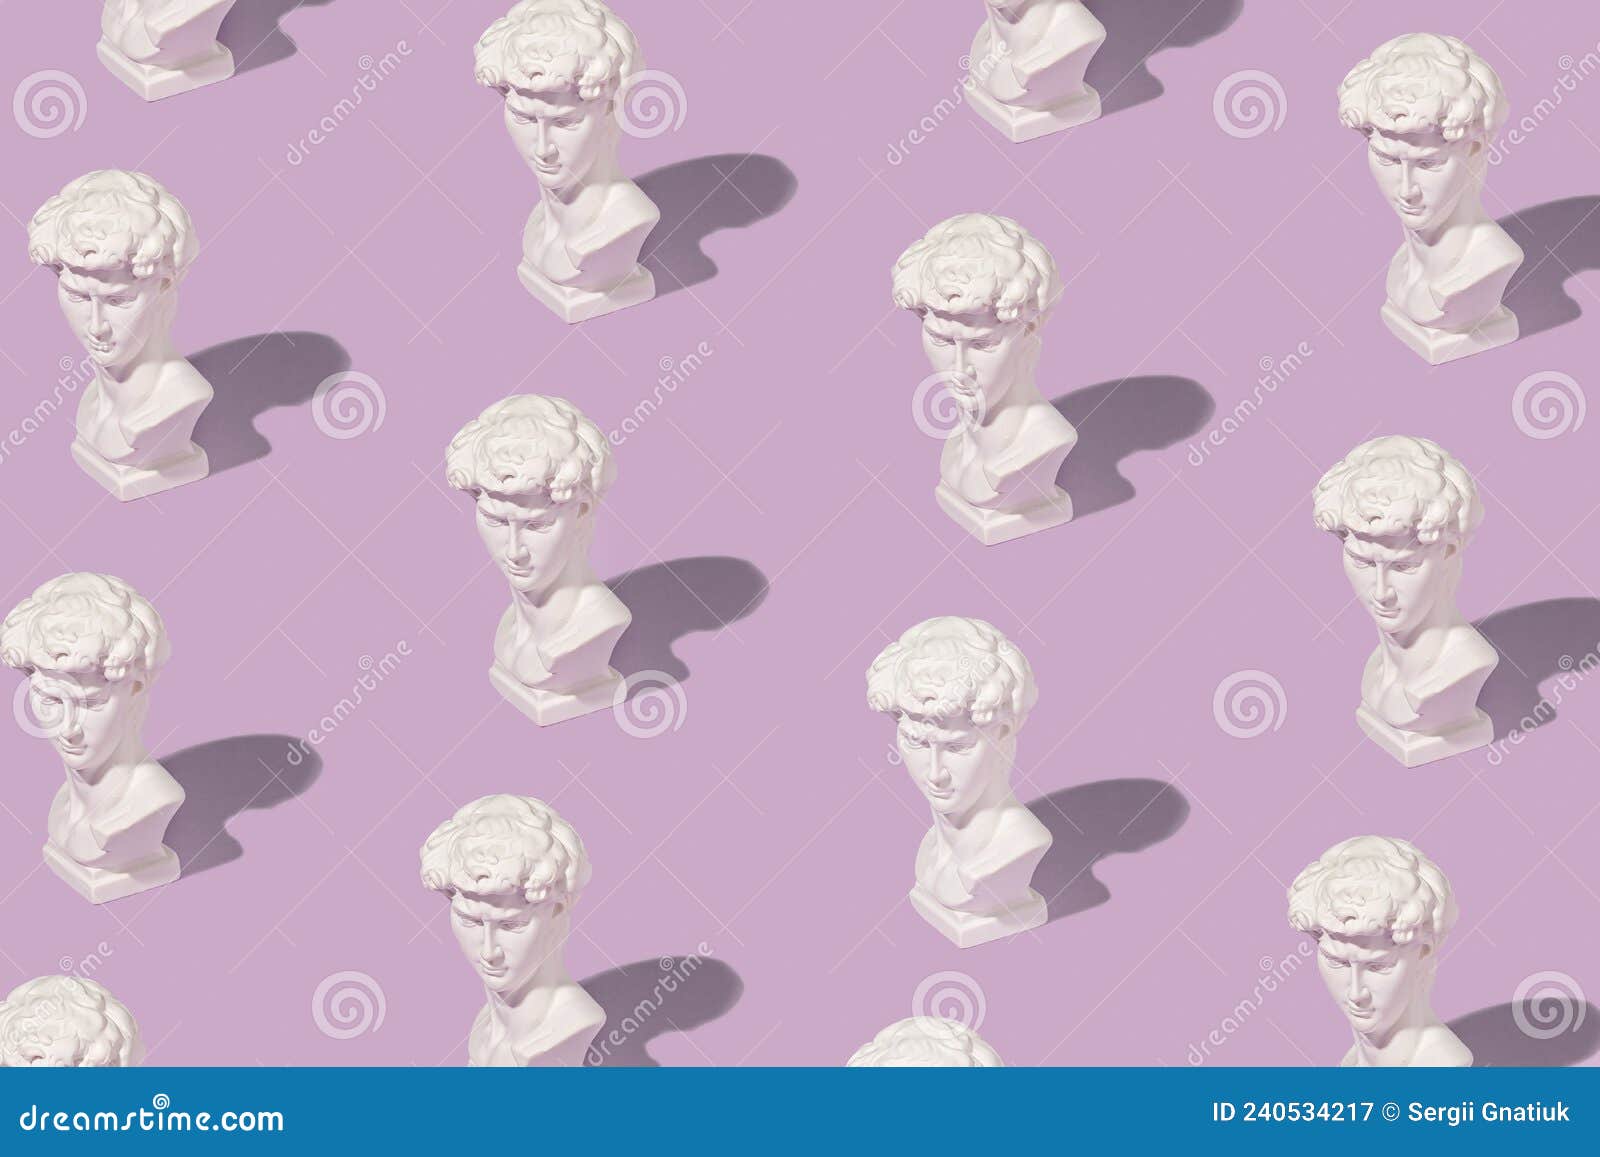 background pattern of white grecian or roman busts